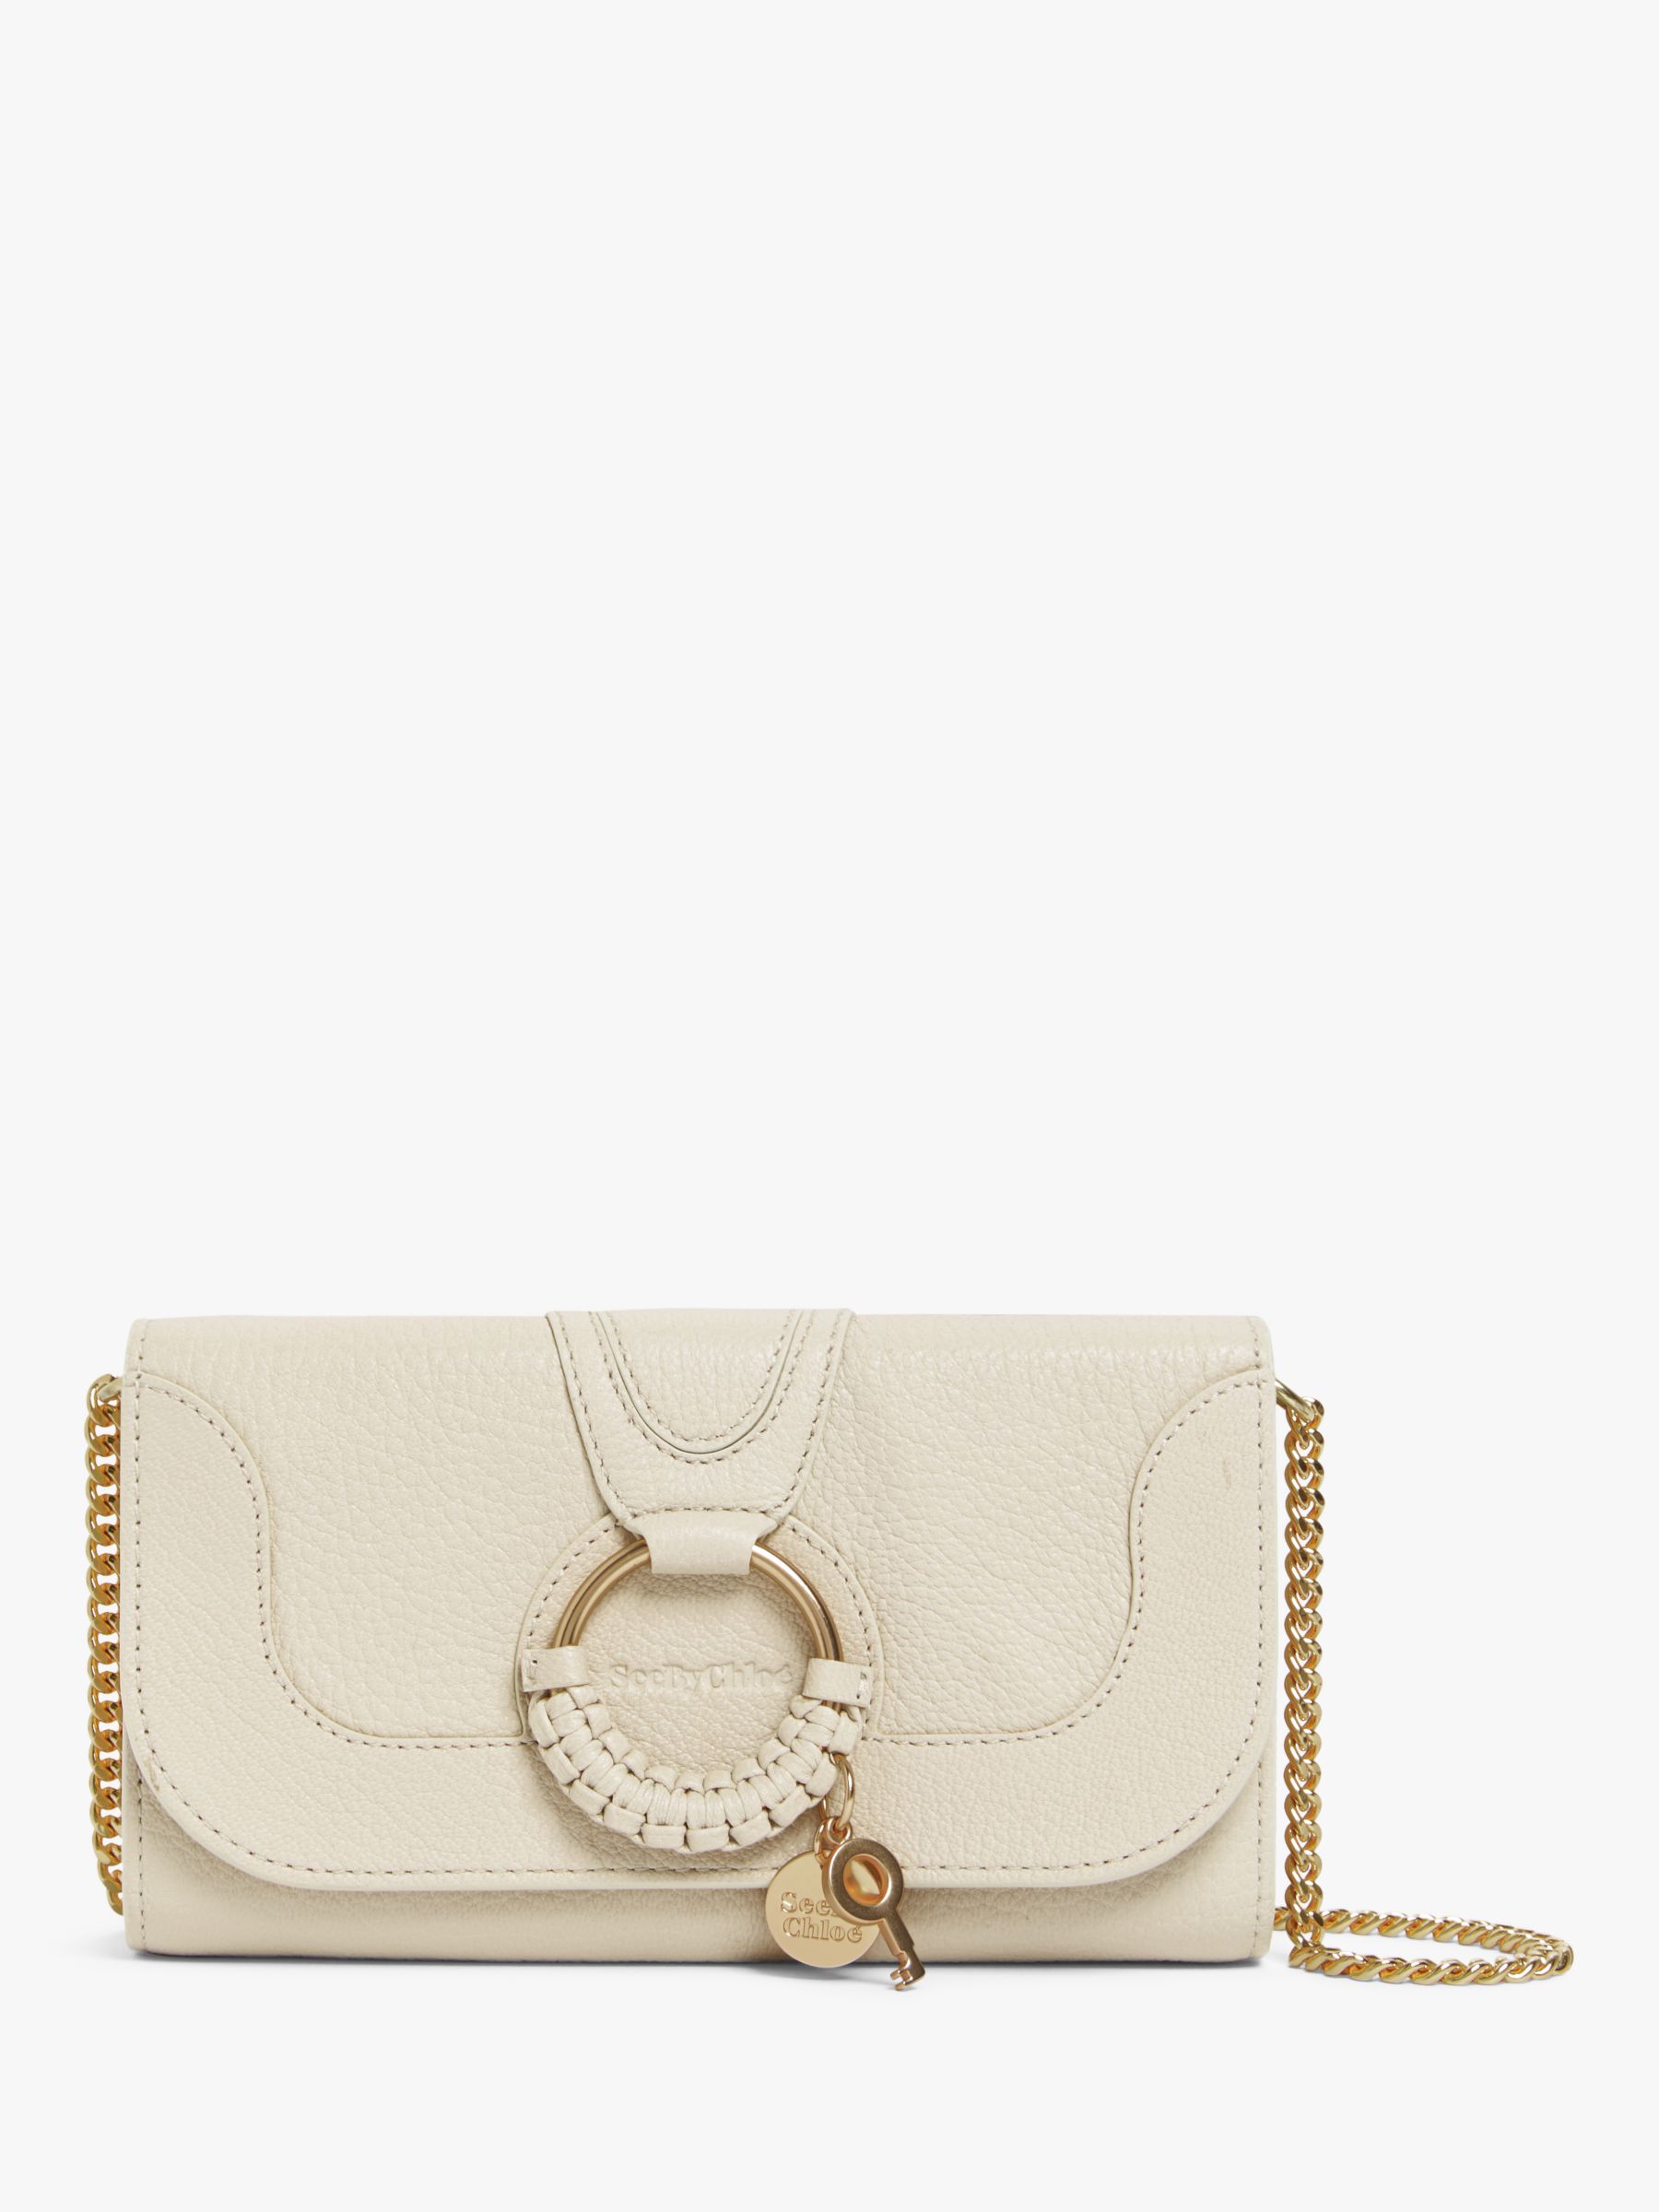 See By Chloé Hana Large Leather Chain Purse, Cement Beige at John Lewis ...